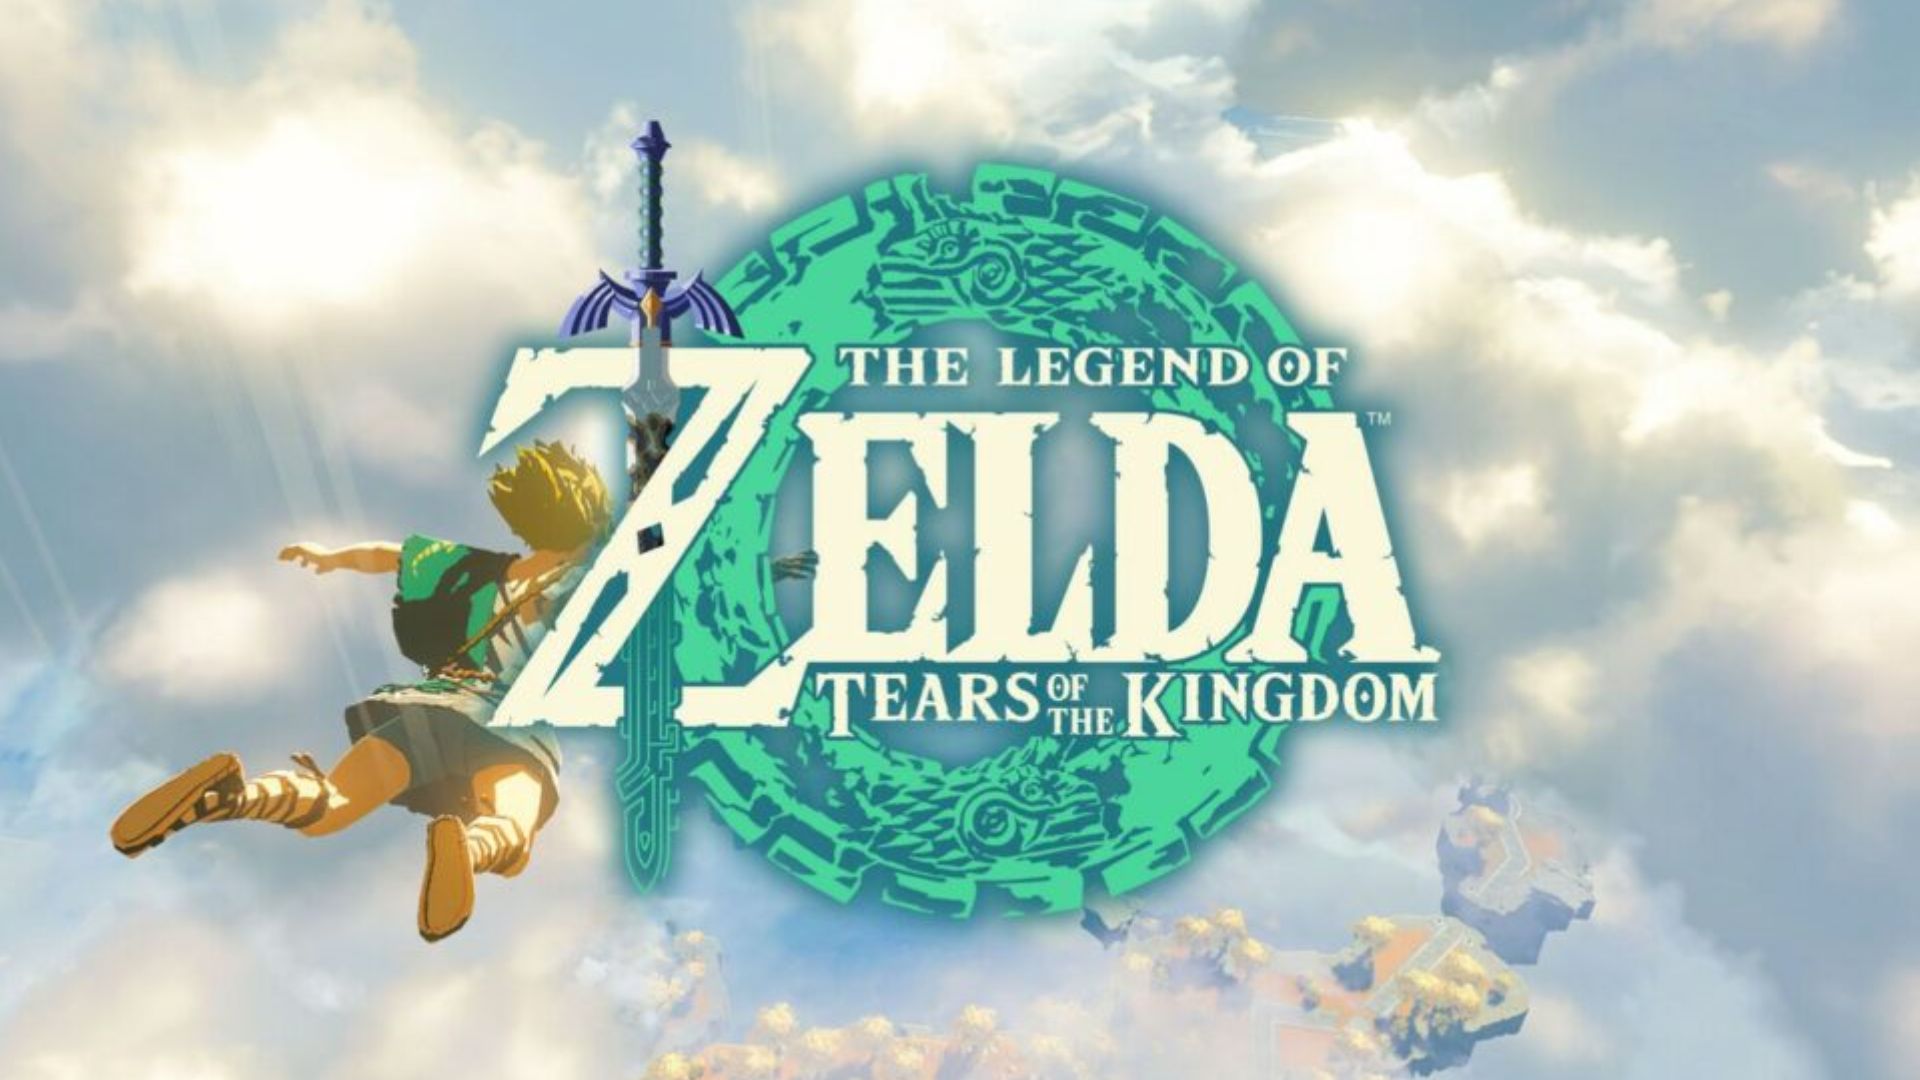 Zelda Tears of the Kingdom Announced With Release Date, Trailer and Story